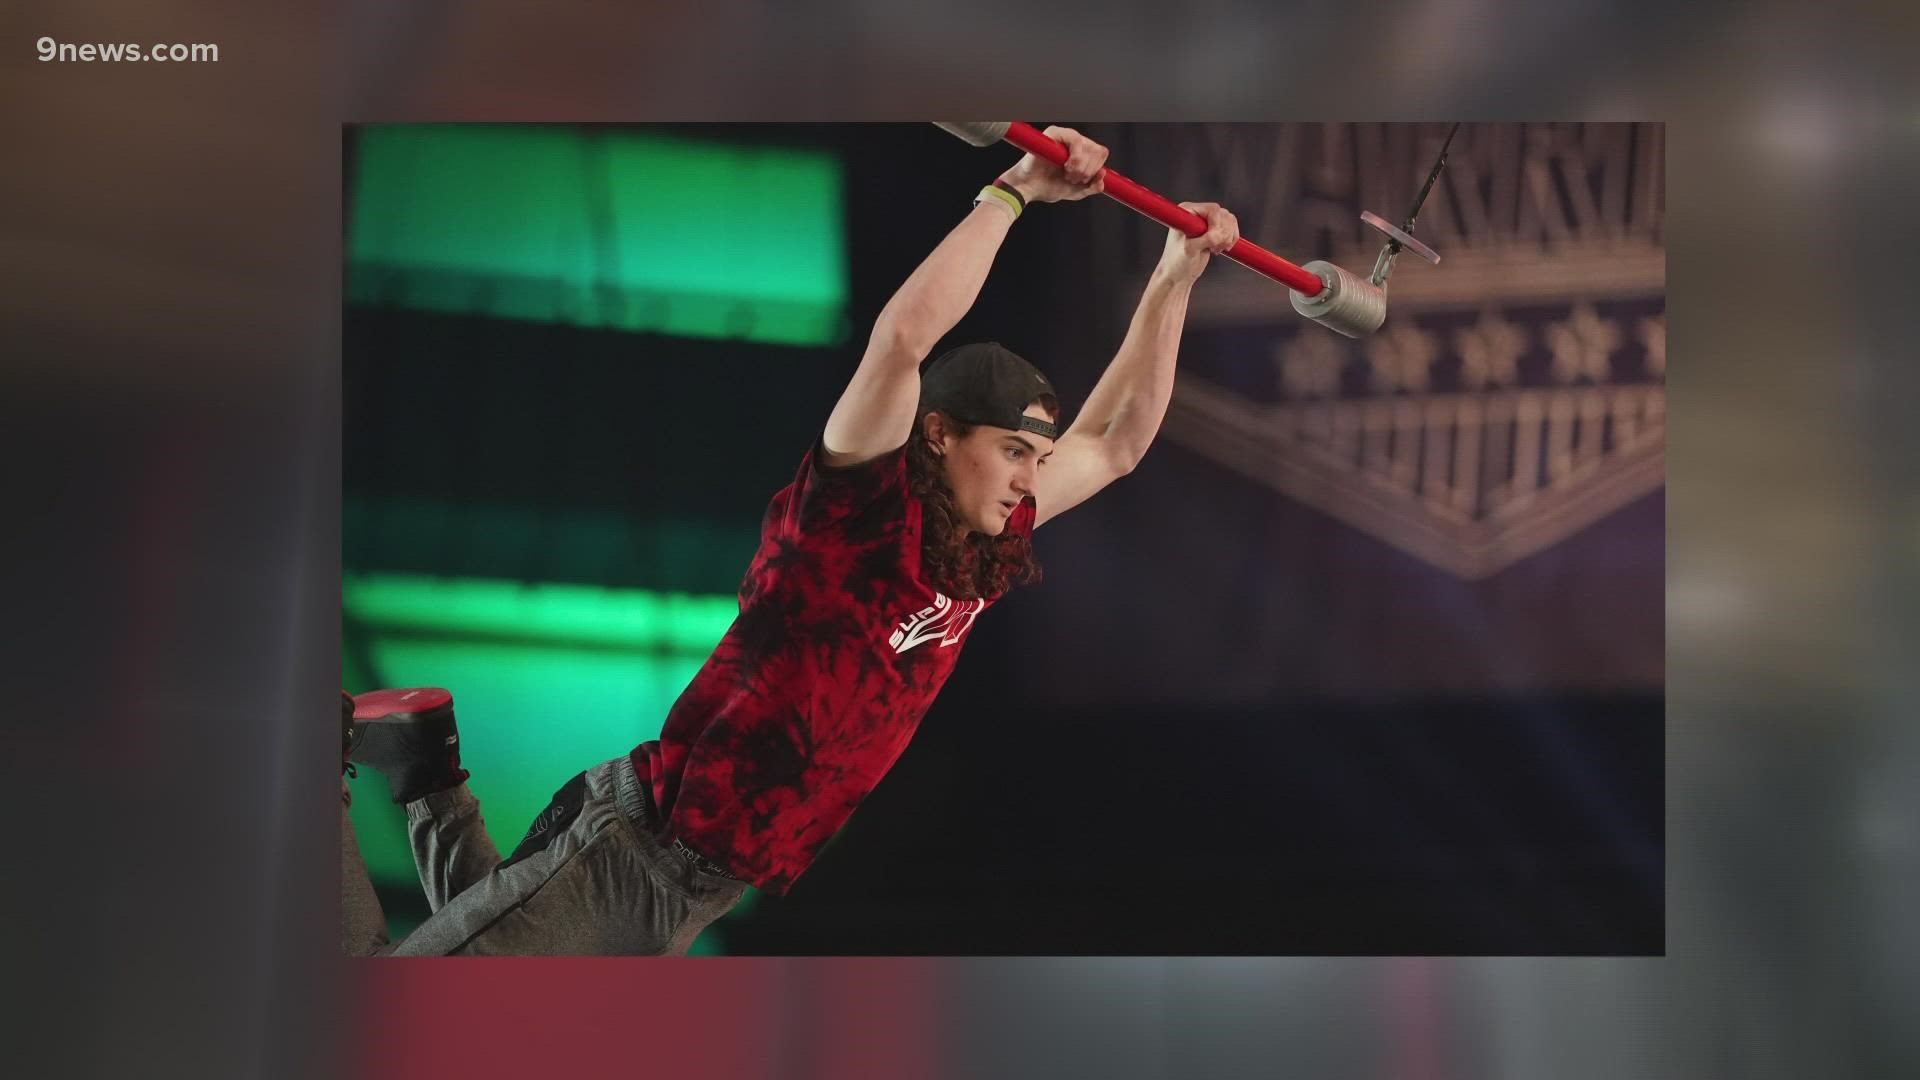 A young man from Castle Rock is part of the first group of teenagers to compete on American Ninja Warrior. Monday, he was the last ninja standing.